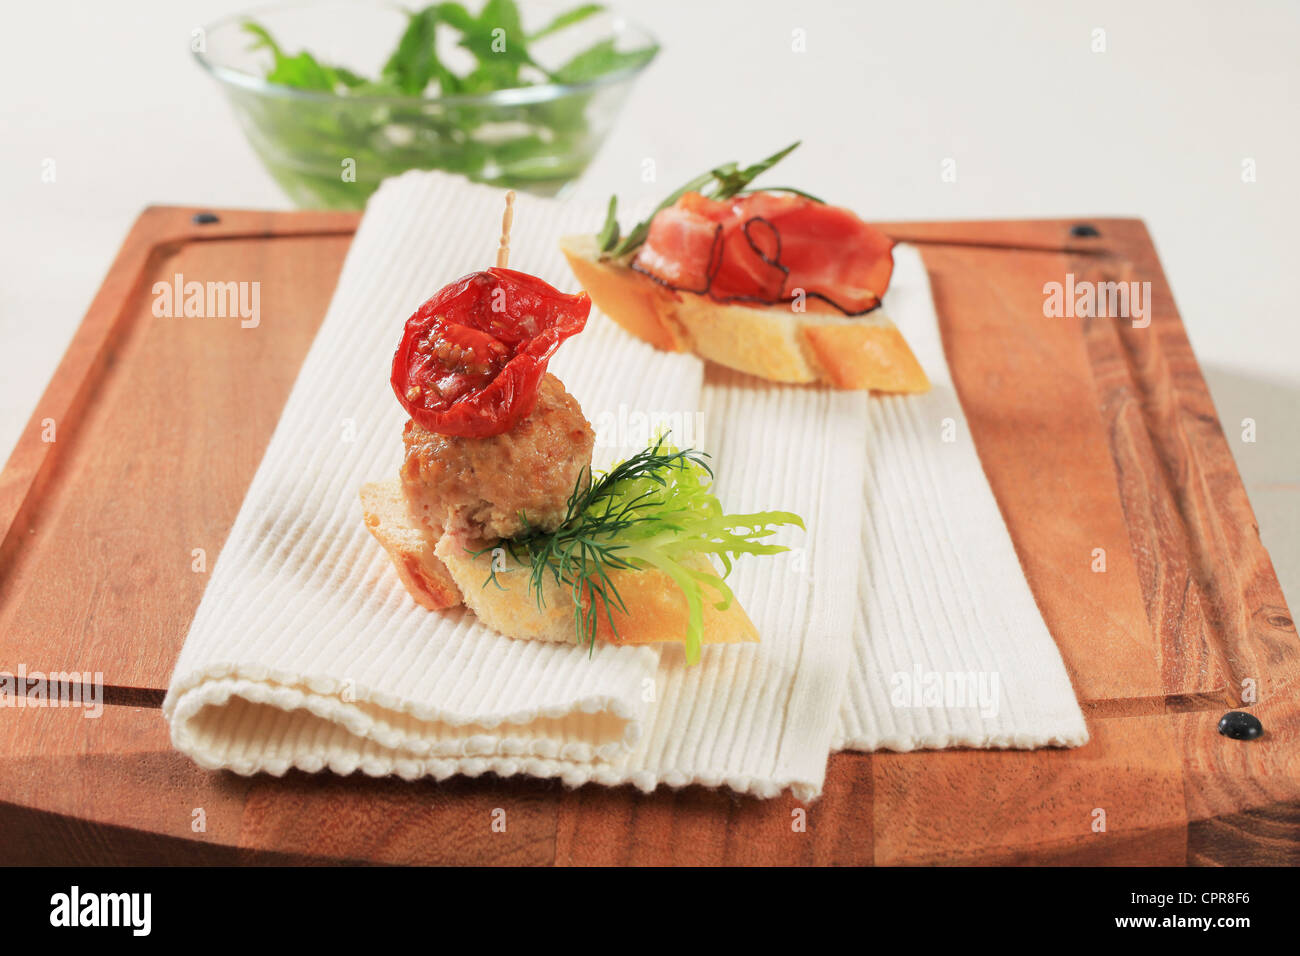 Meatball and prosciutto canapes on a cutting board Stock Photo